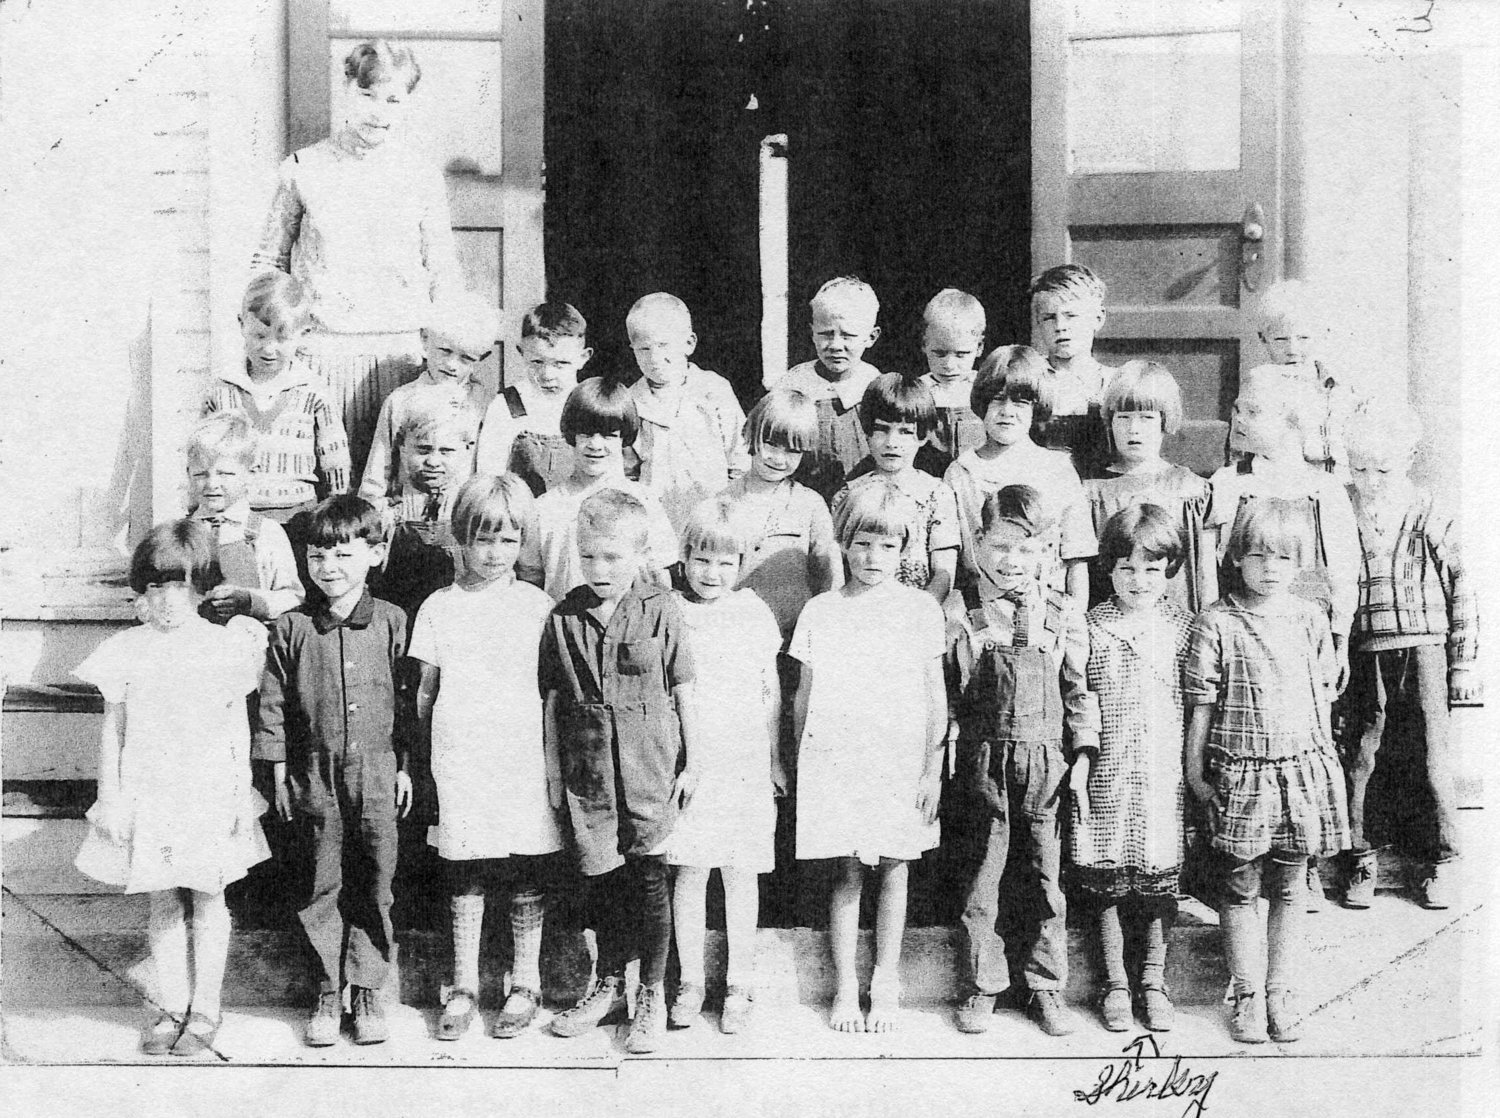 This grade school photo shows Shirley and her classmates.